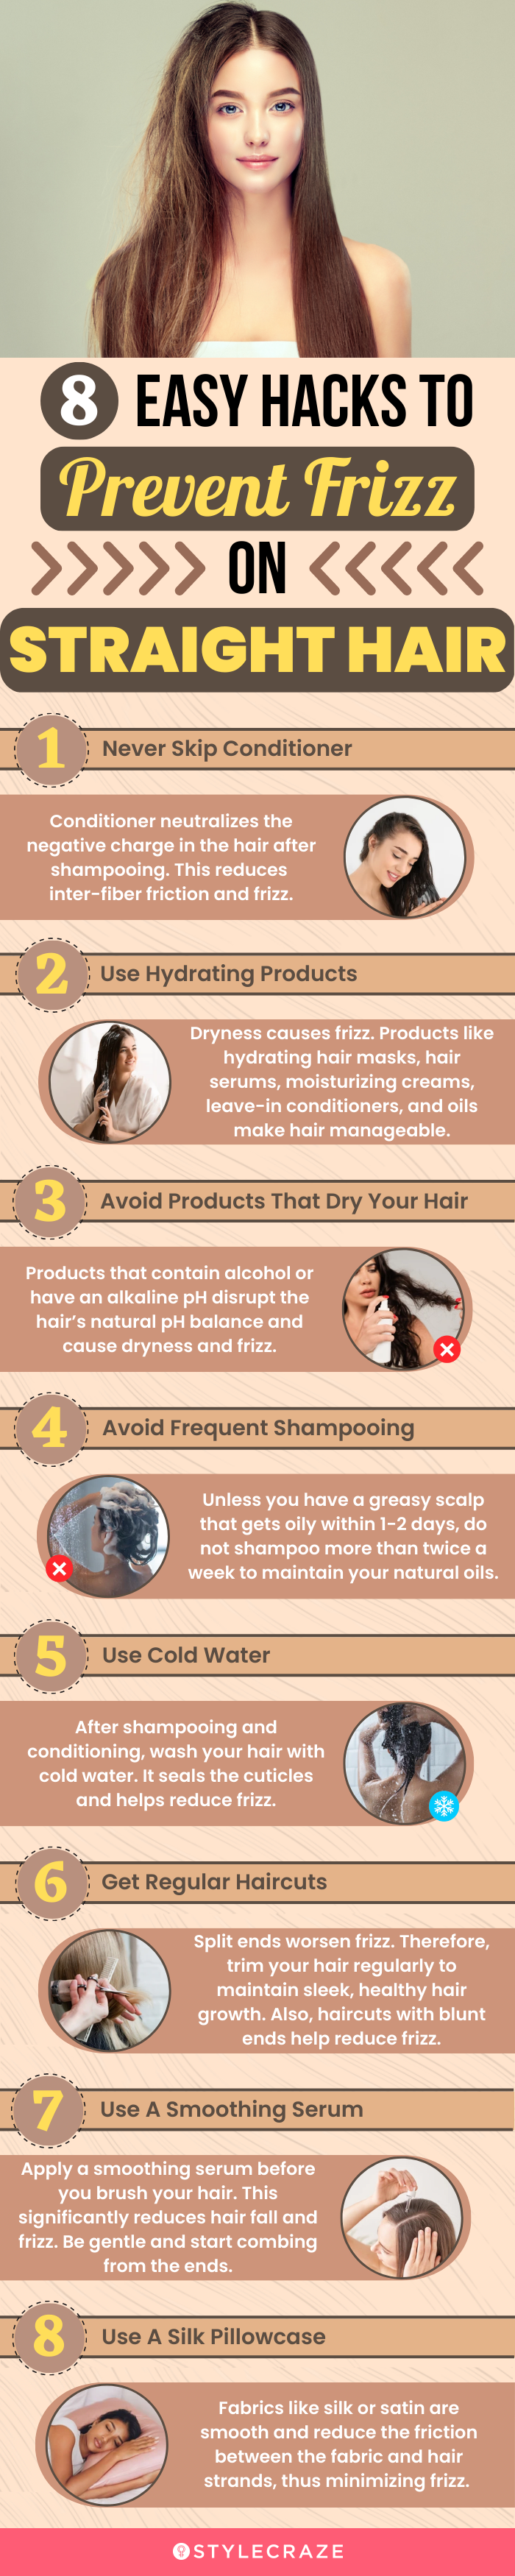 8 easy hacks to prevent frizz on straight hair (infographic)